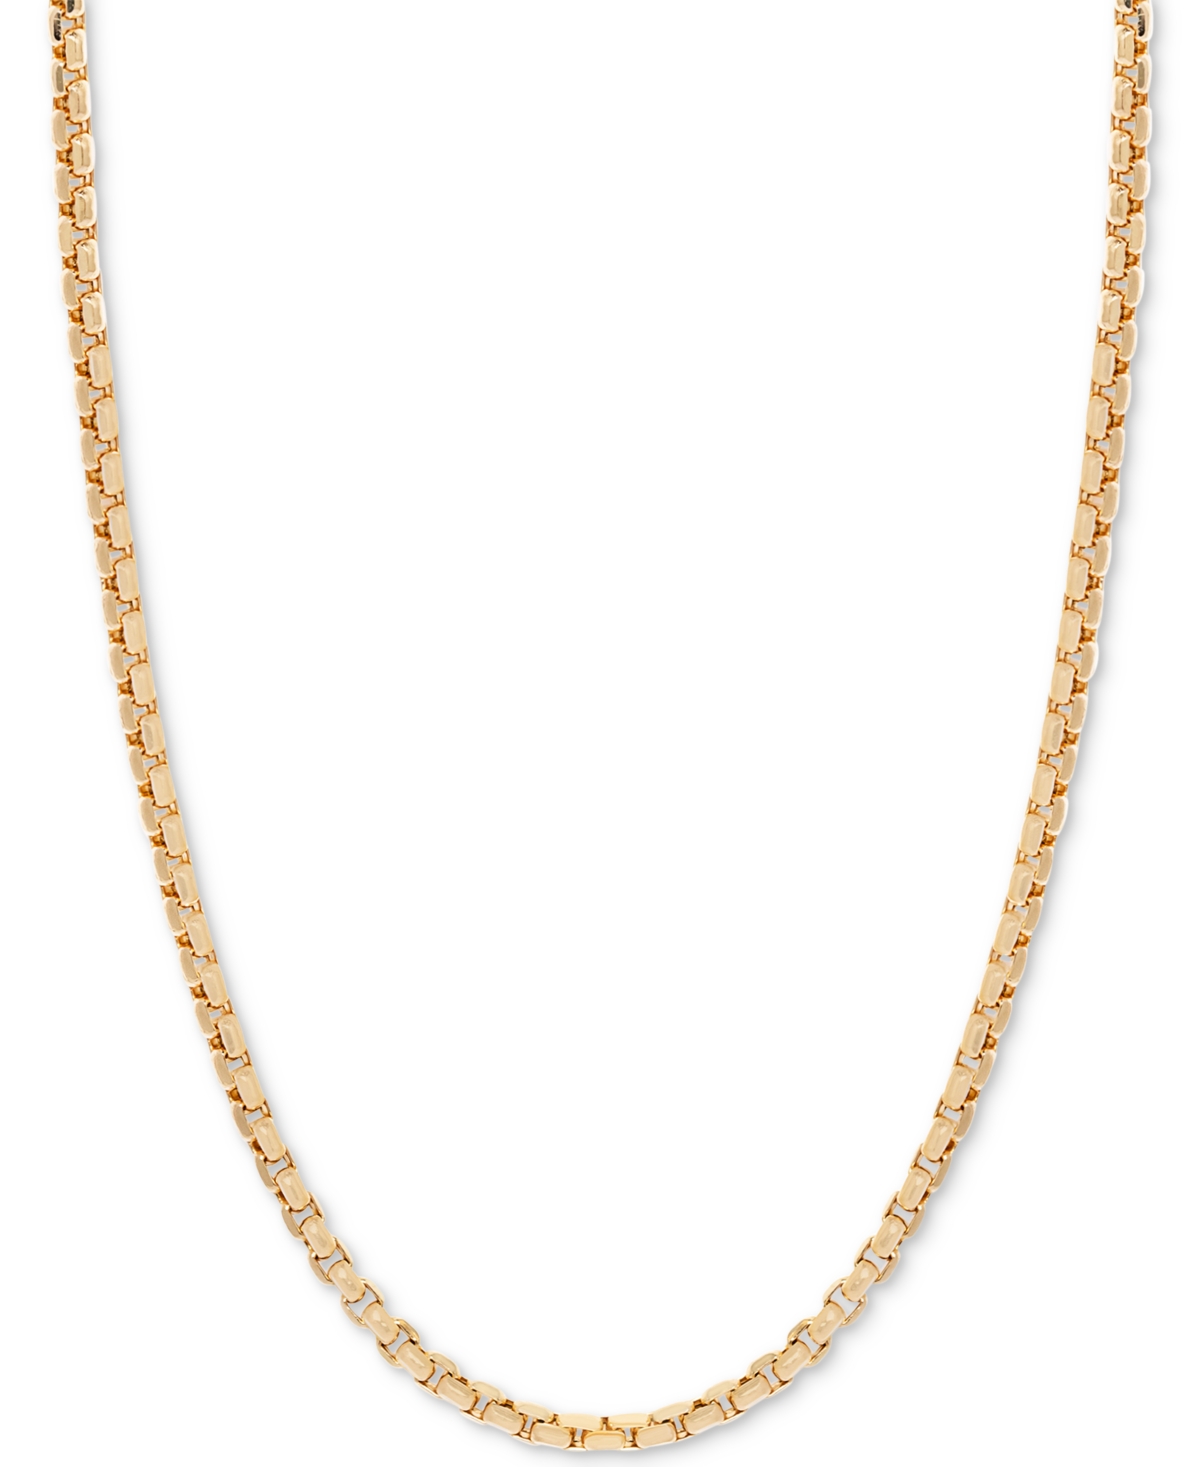 18" Round Box Link Chain Necklace (1-1/2 mm) in 14k Gold - Yellow Gold